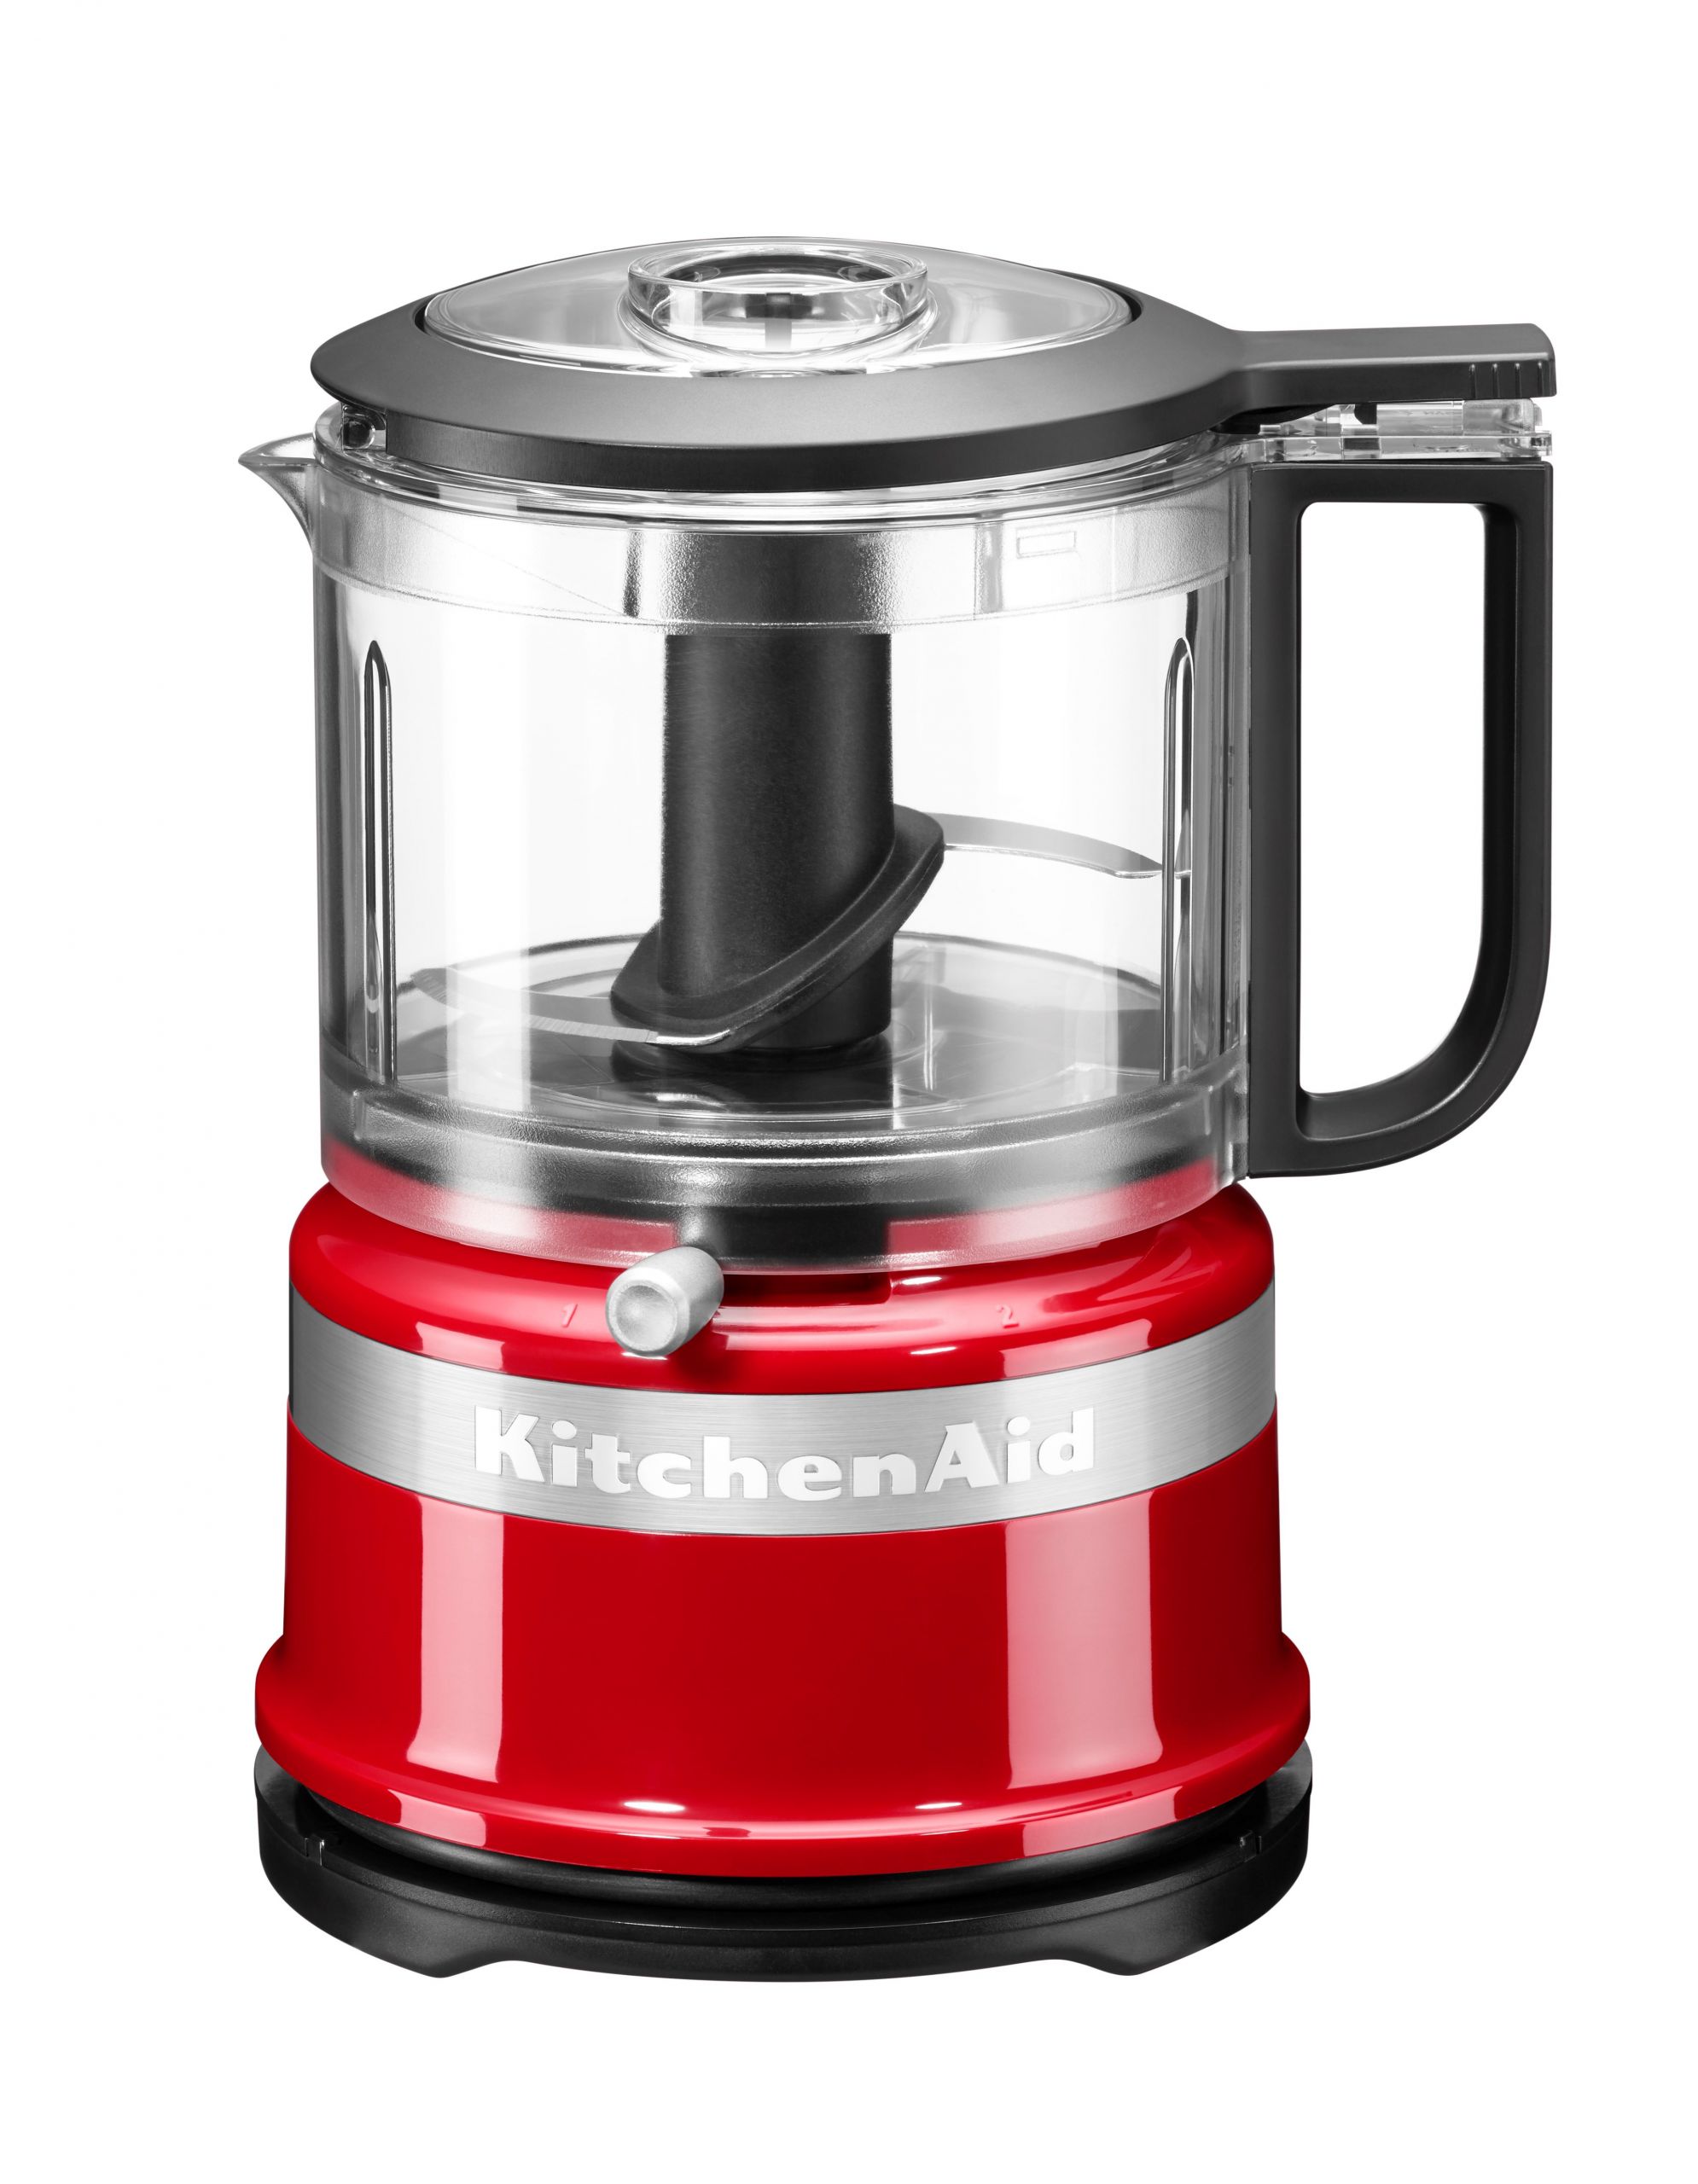 Kitchen Aide Small Appliances
 KitchenAid launched a new Mini Food Processor Home